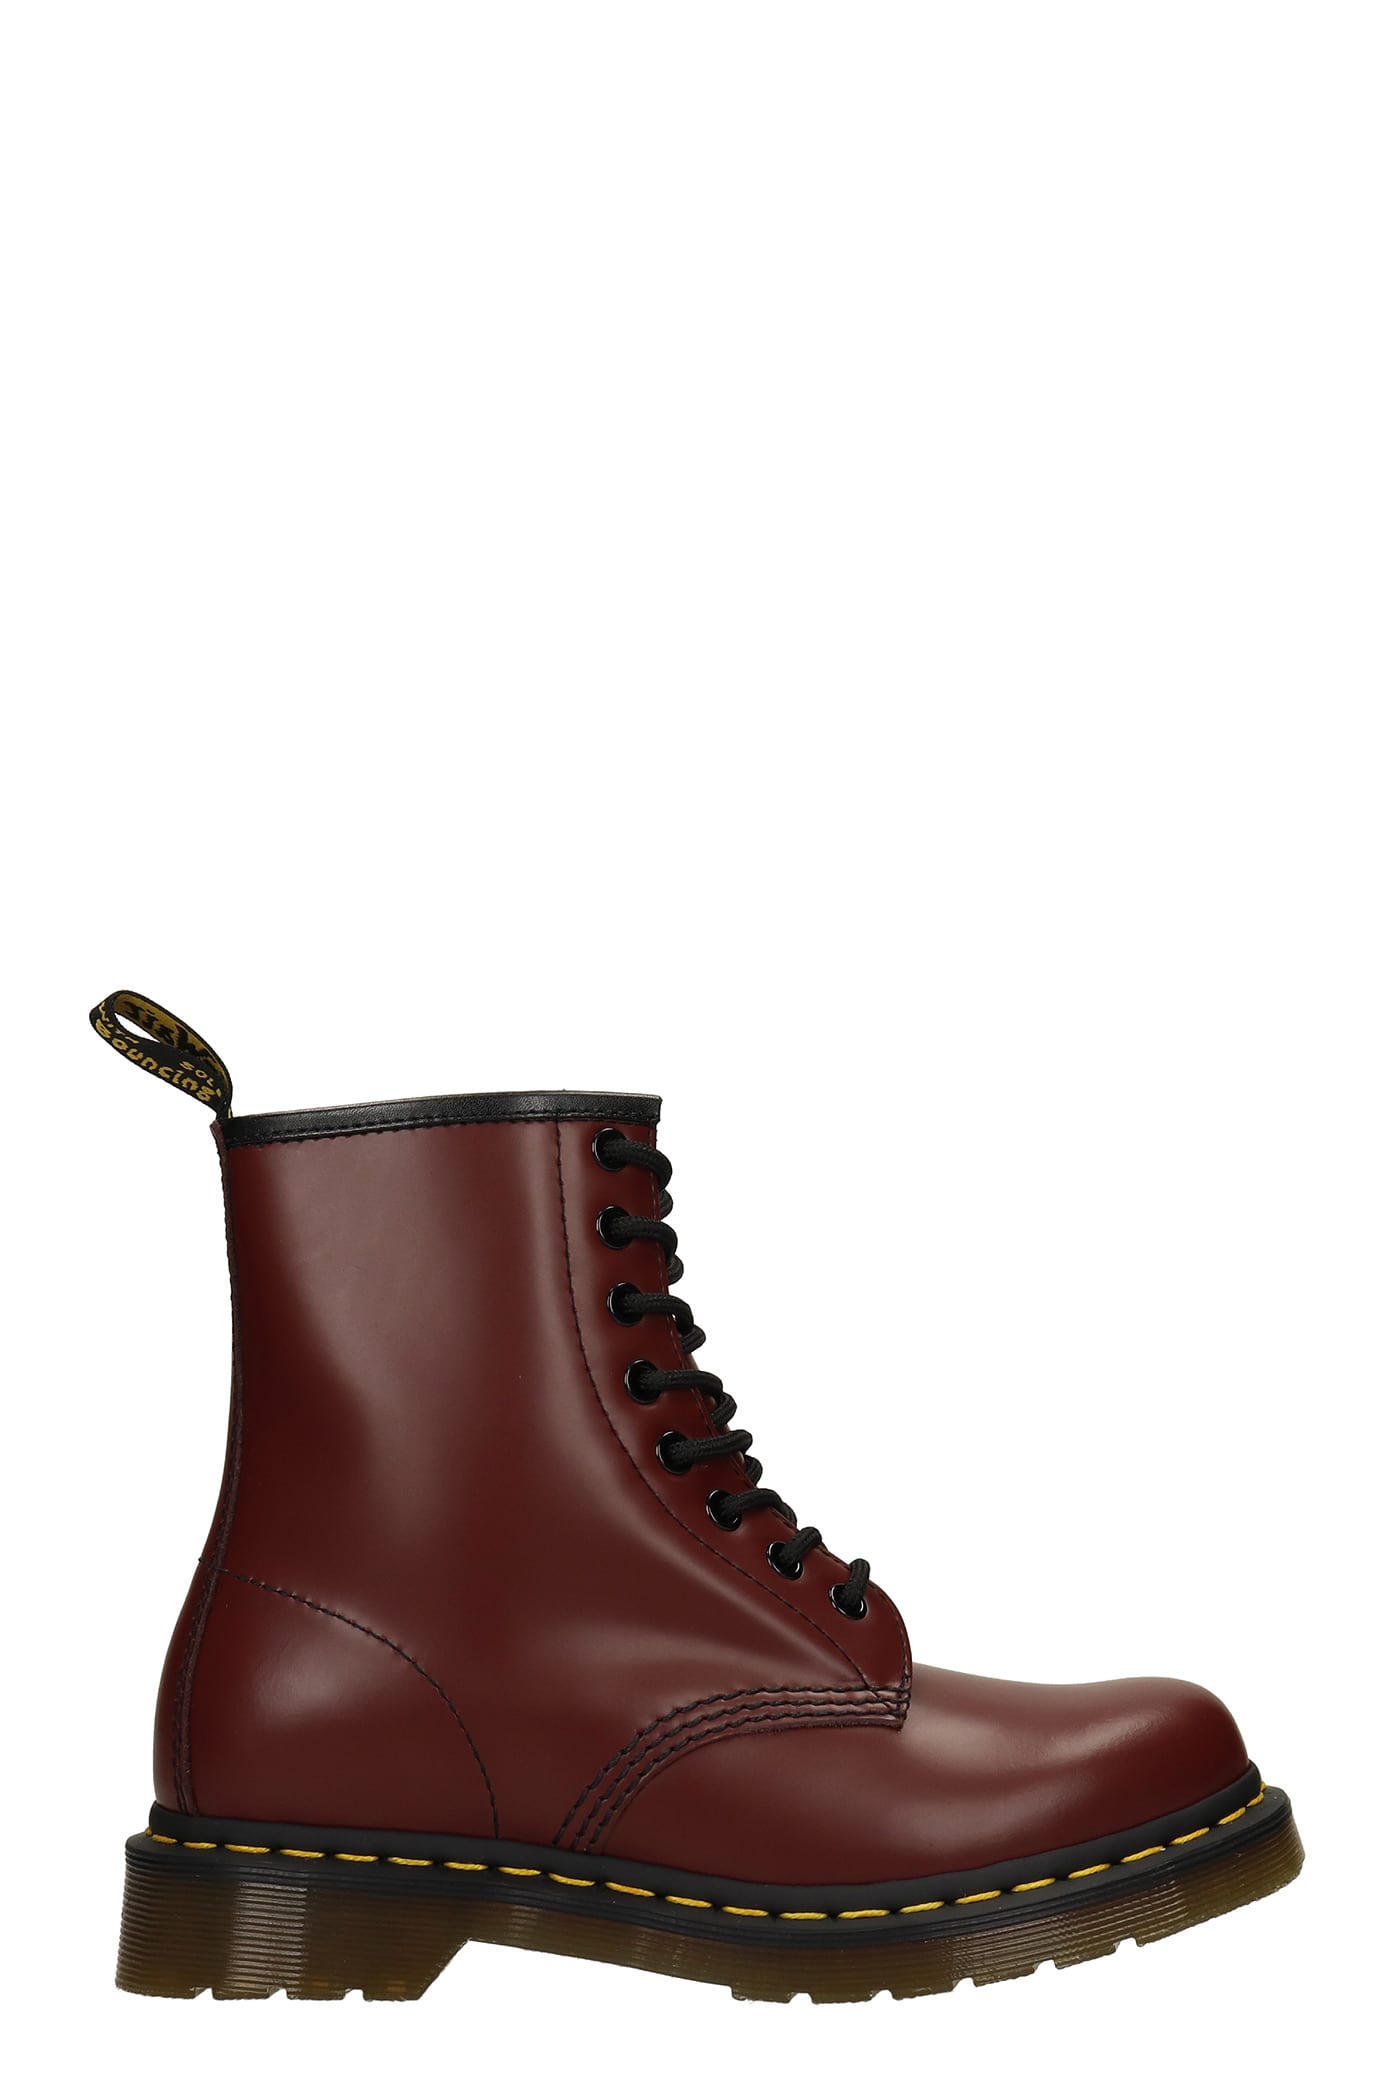 Dr. Martens 1460 Smooth Combat Boots In Bordeaux Leather